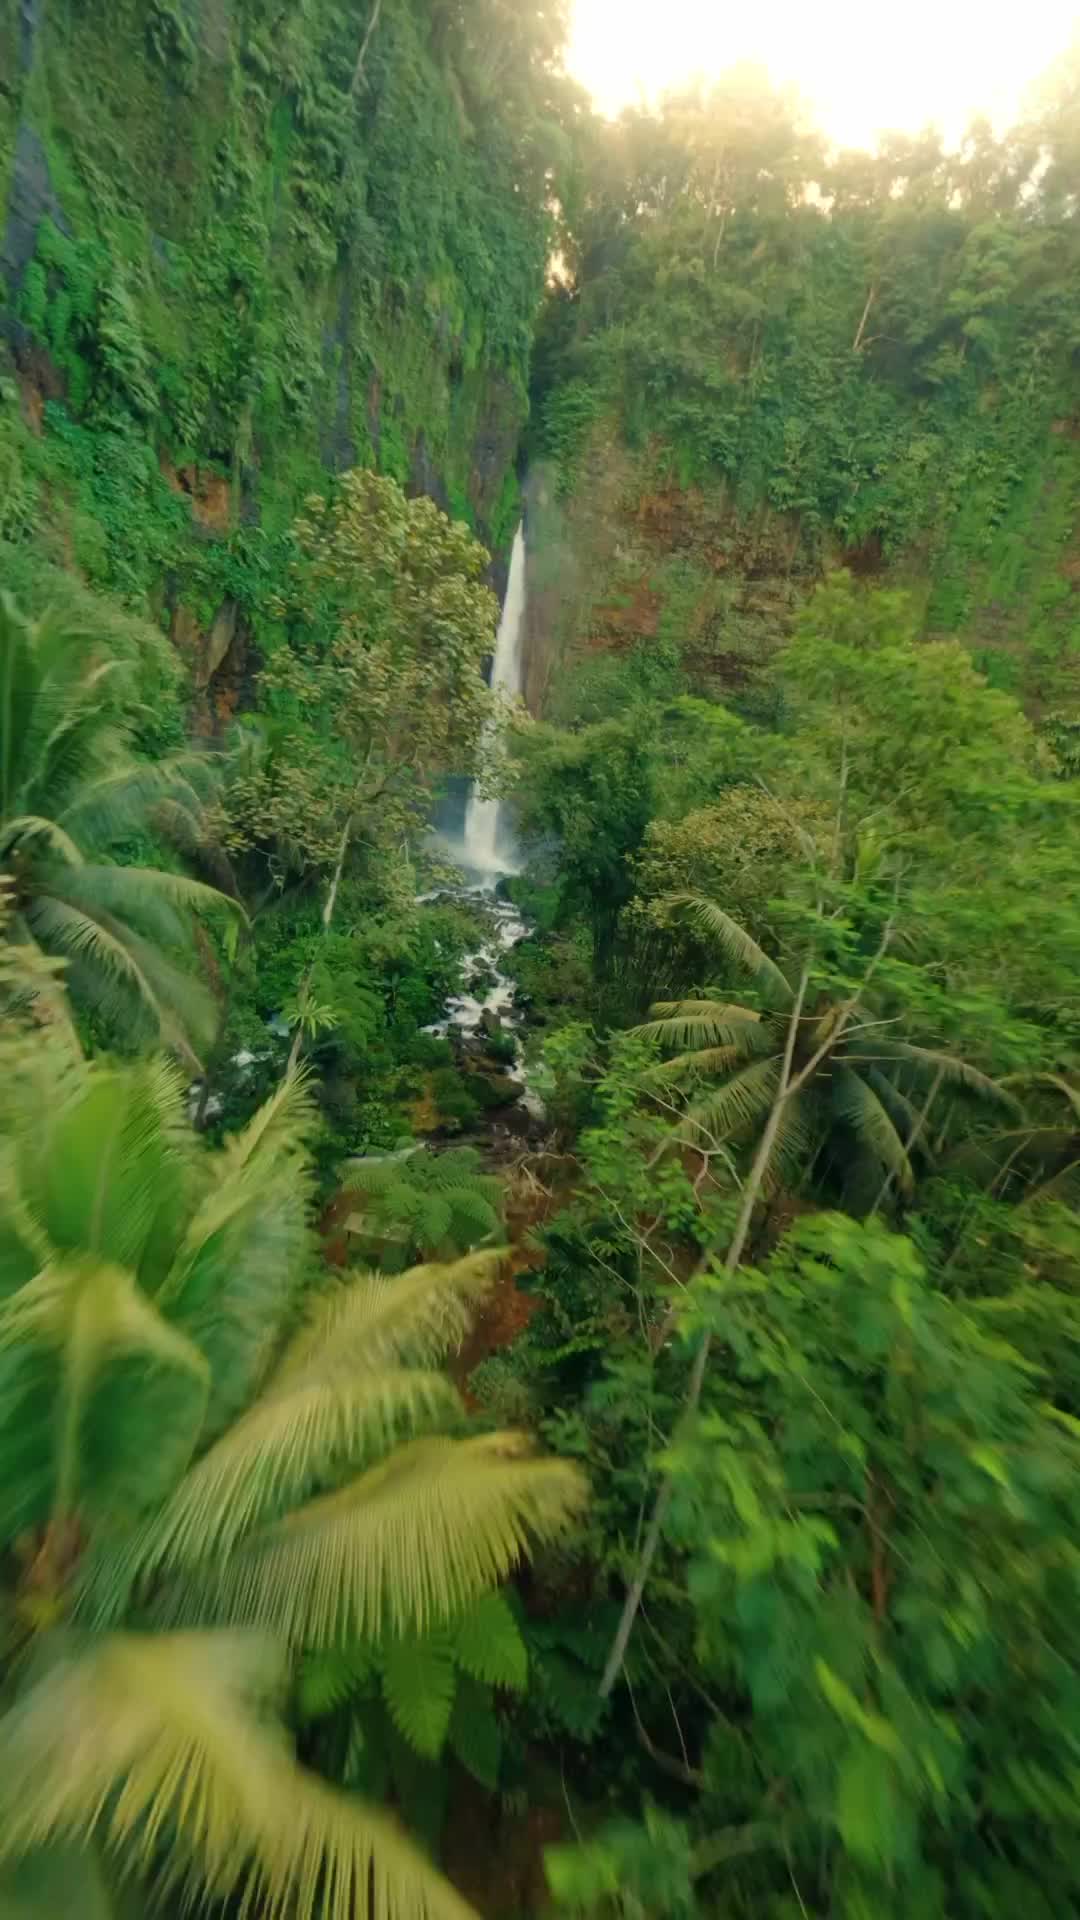 Wait for it!!! 
Like a human, a drone also need to take a shower, thats how i show love to my drone ❤️

Coated by @kotking 
Color graded with Jungle luts by @hendriwlsss 
Recorded in @gopro hero 11 @goproid 

#fpv #fpvdrone #eastjava #indonesia #kapasbiru #beautifuldestinations